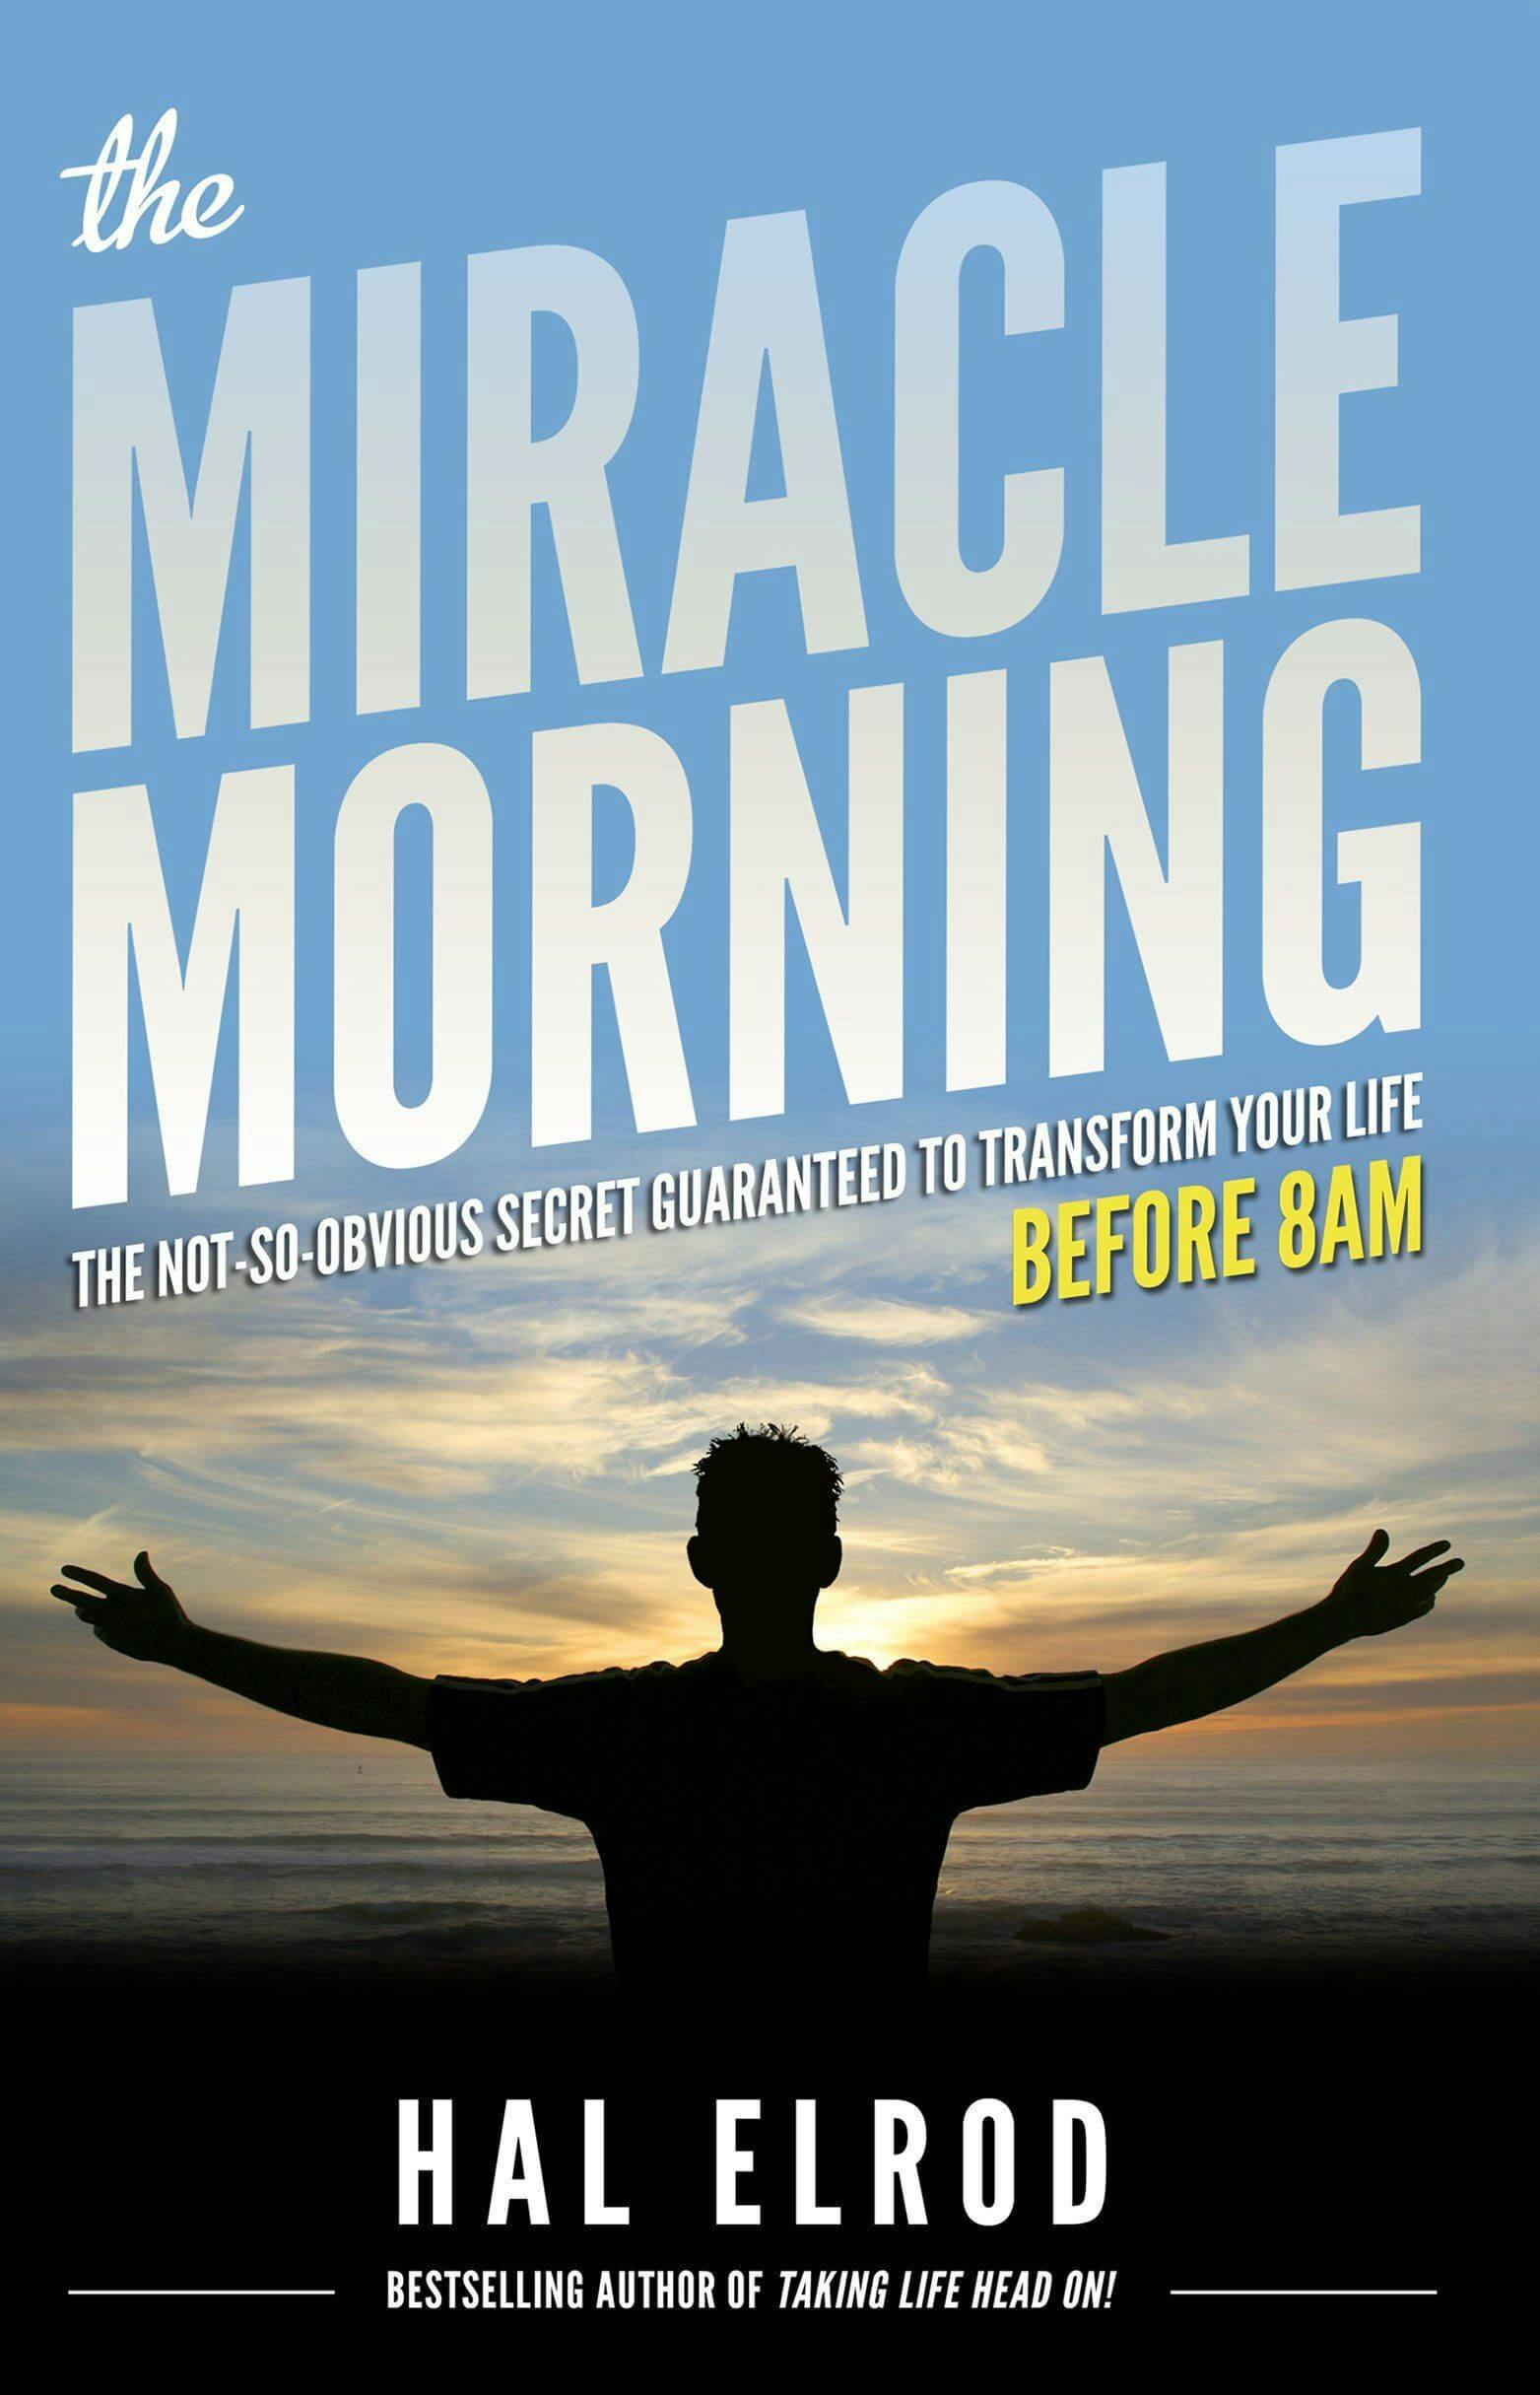 Miracle Morning by Hal Elrod <a href='https://www.goodreads.com/book/show/17166225-the-miracle-morning'>(Goodreads)</a>